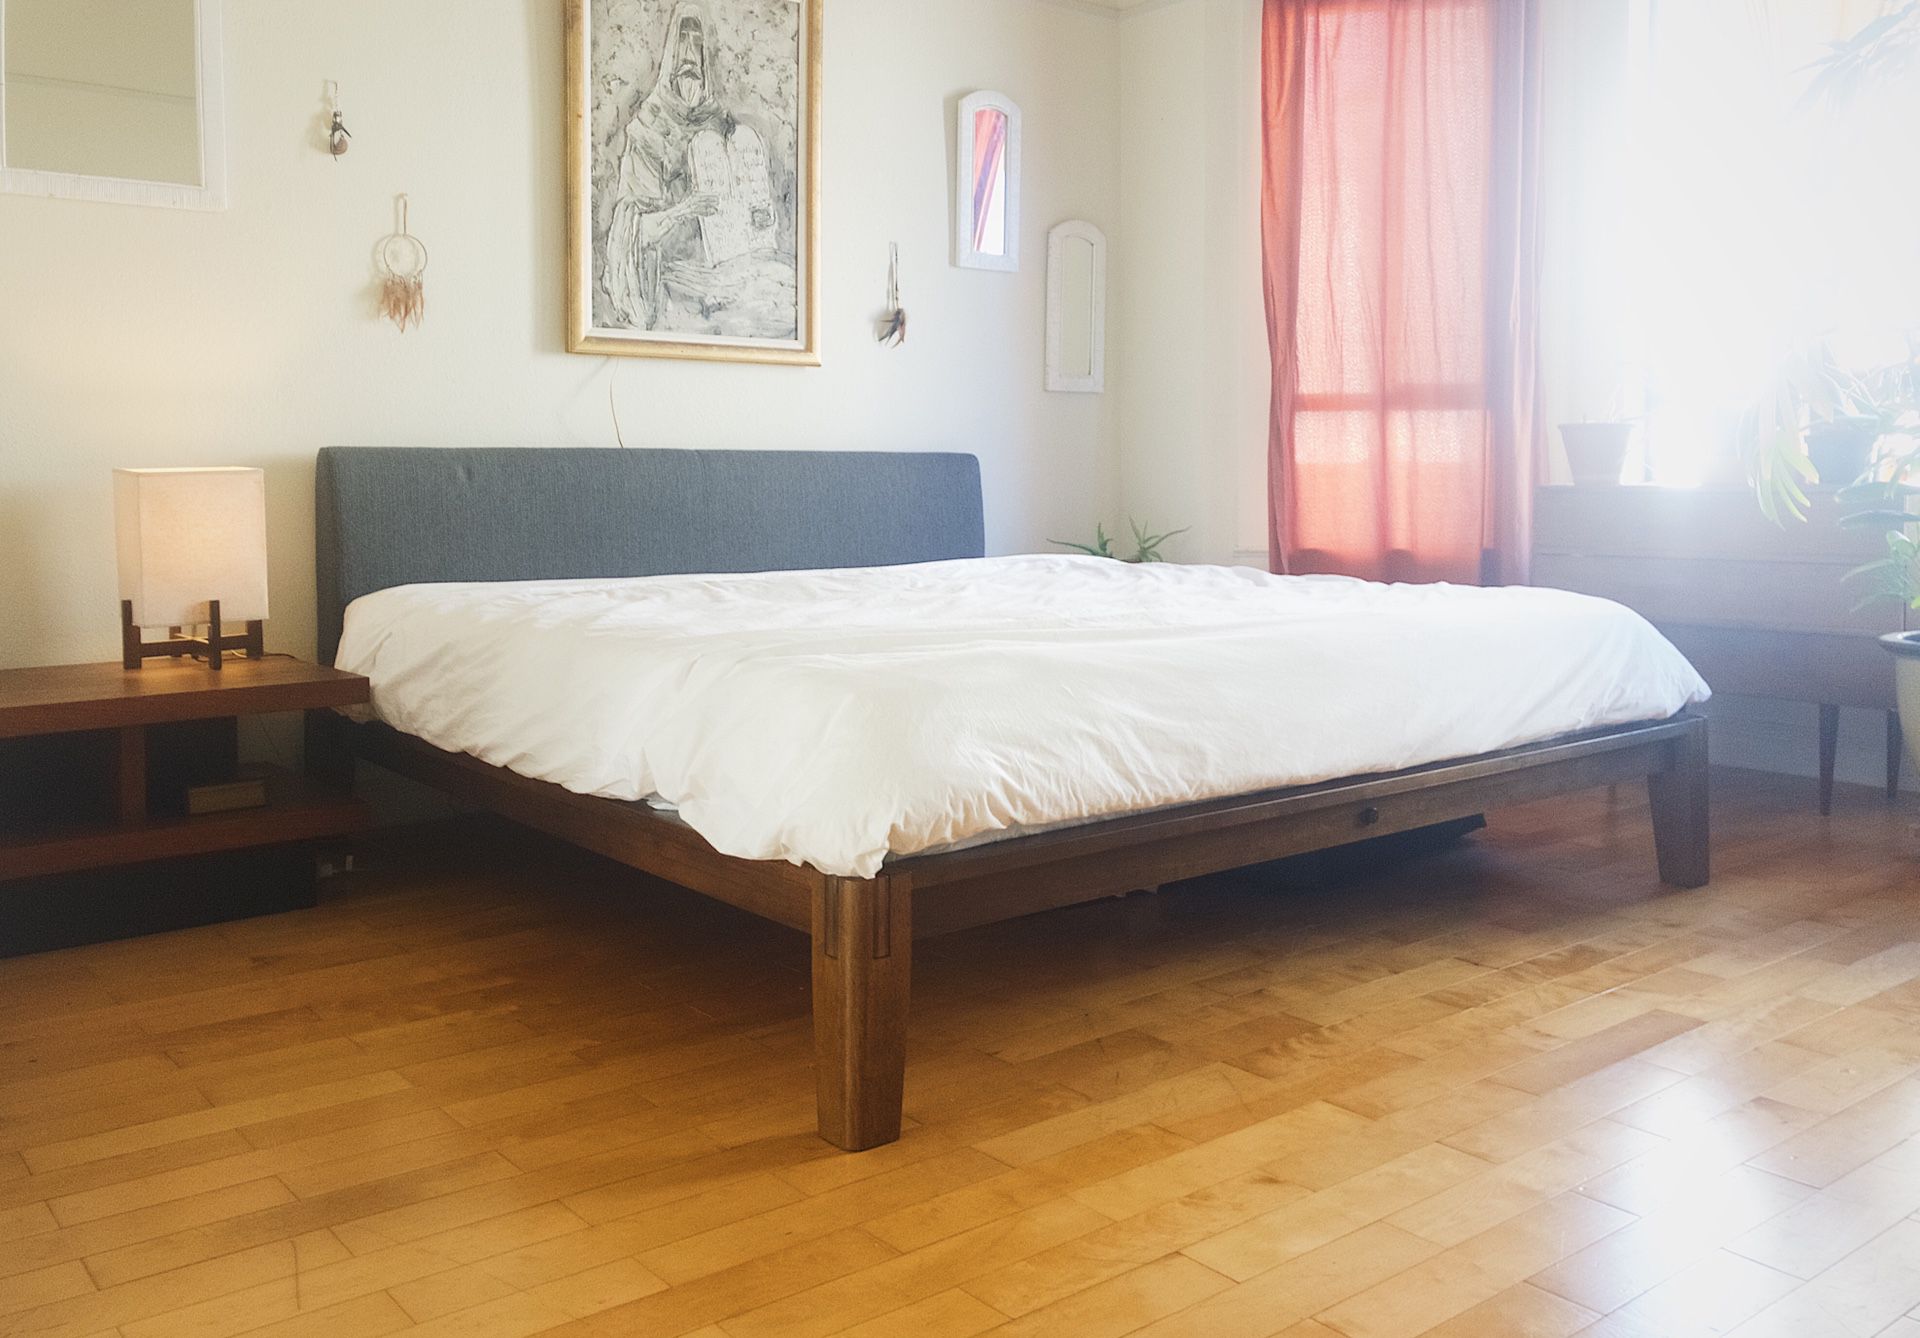 Thuma King Bed Frame for Sale in San Francisco, CA - OfferUp